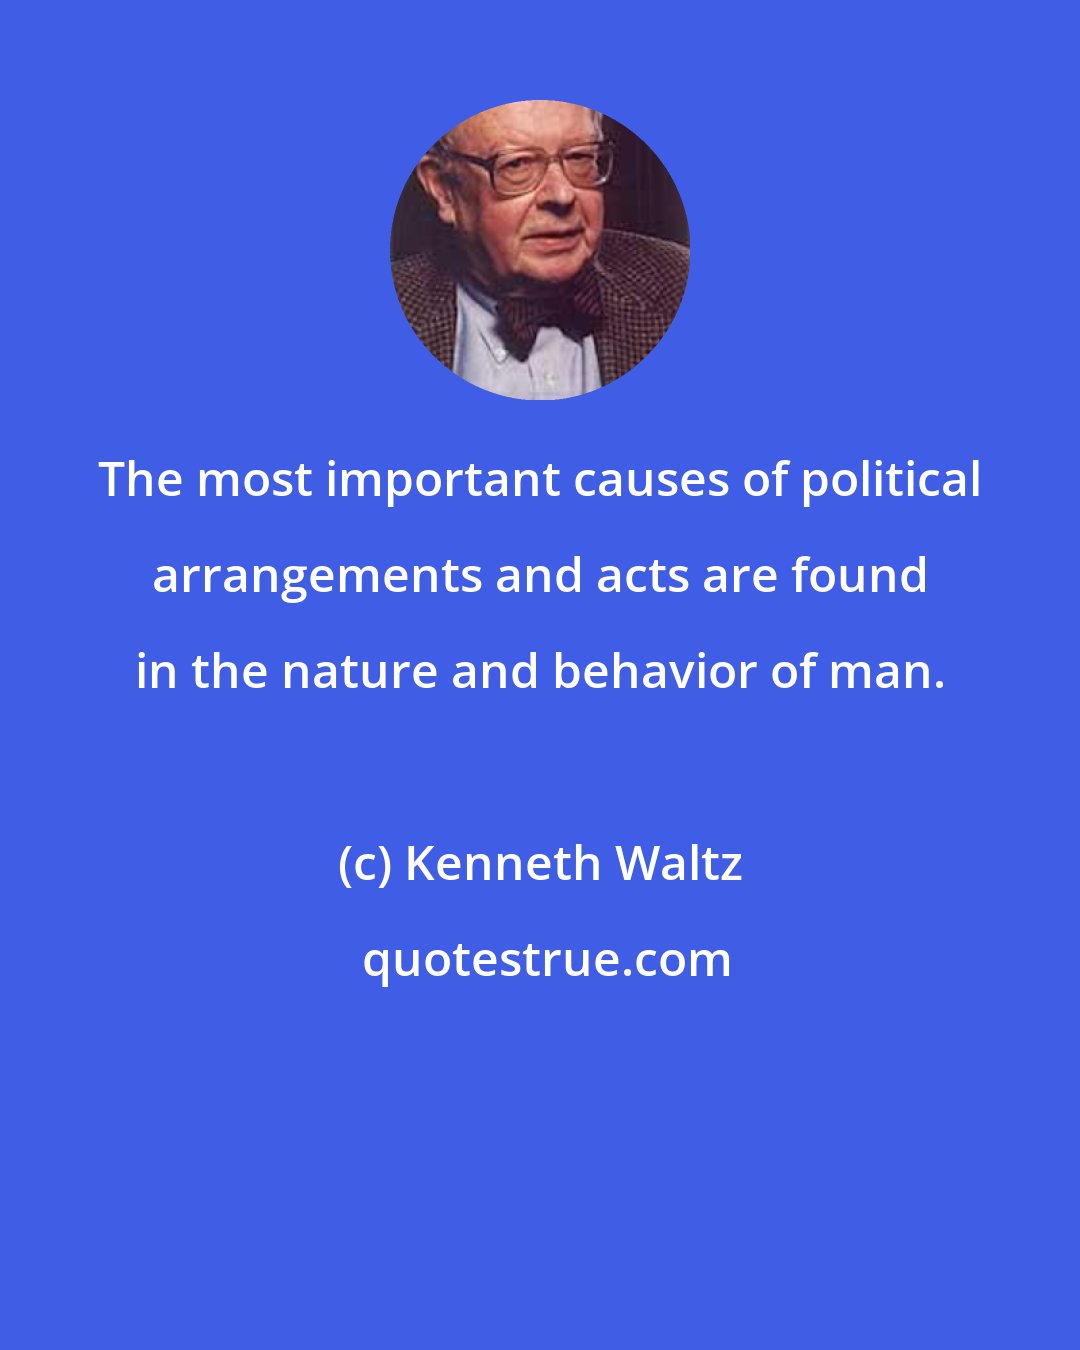 Kenneth Waltz: The most important causes of political arrangements and acts are found in the nature and behavior of man.